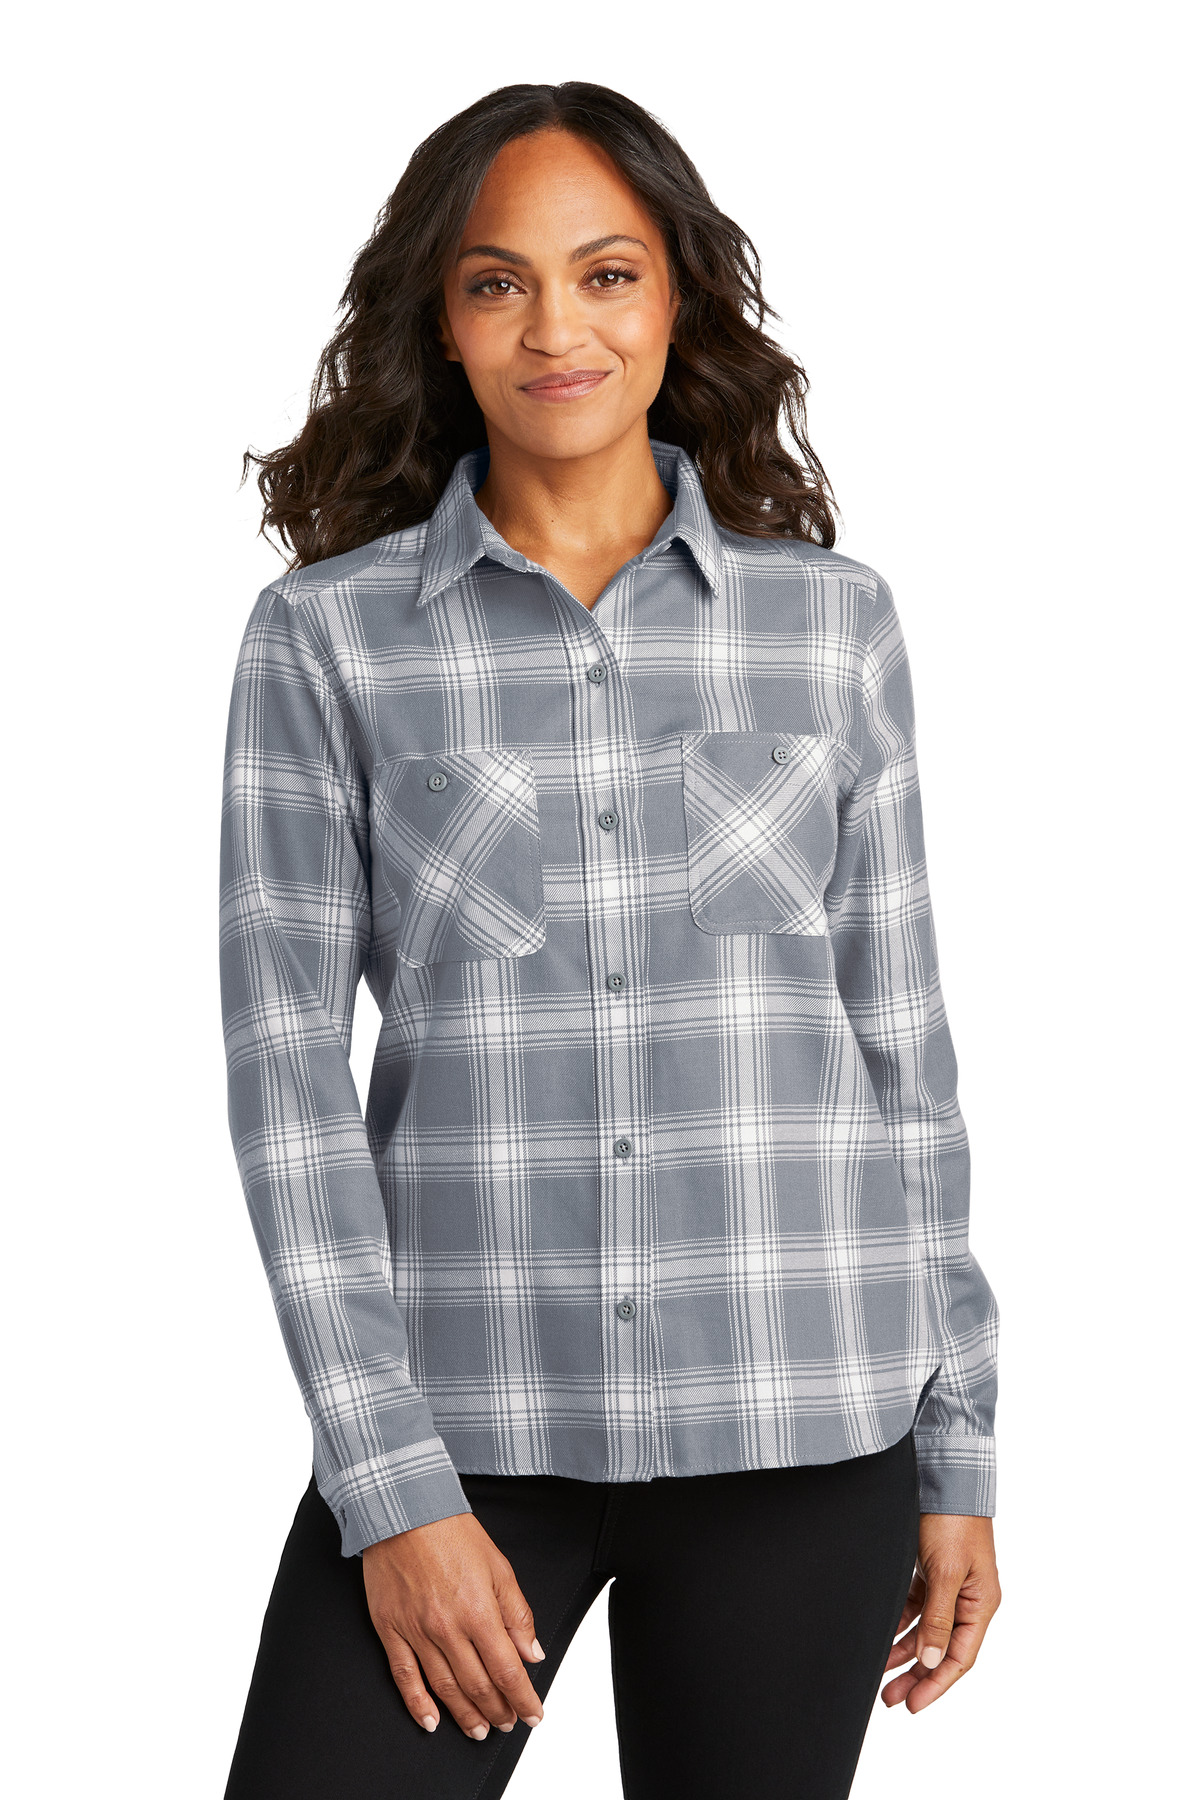 click to view Grey/ Cream Open Plaid